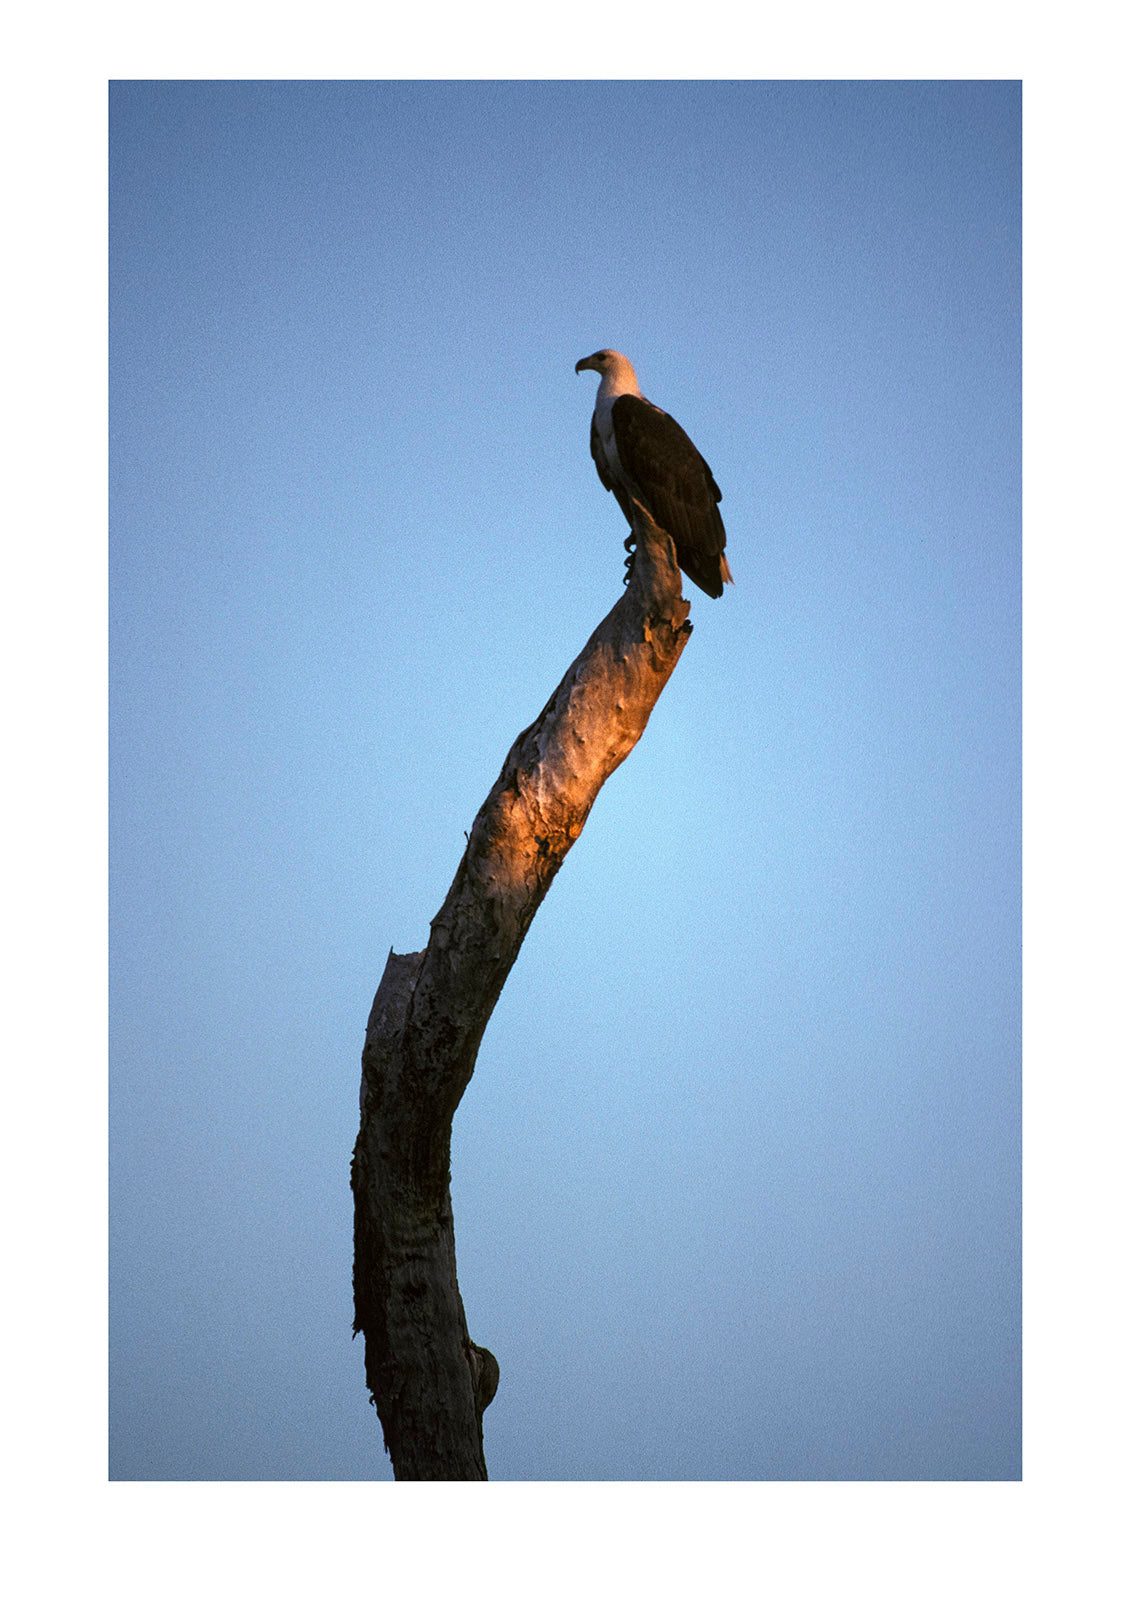 A majestic White-bellied Sea-eagle surveys it's territory from a stag. Yellow Waters, Kakadu National Park, Northern Territory, Australia.